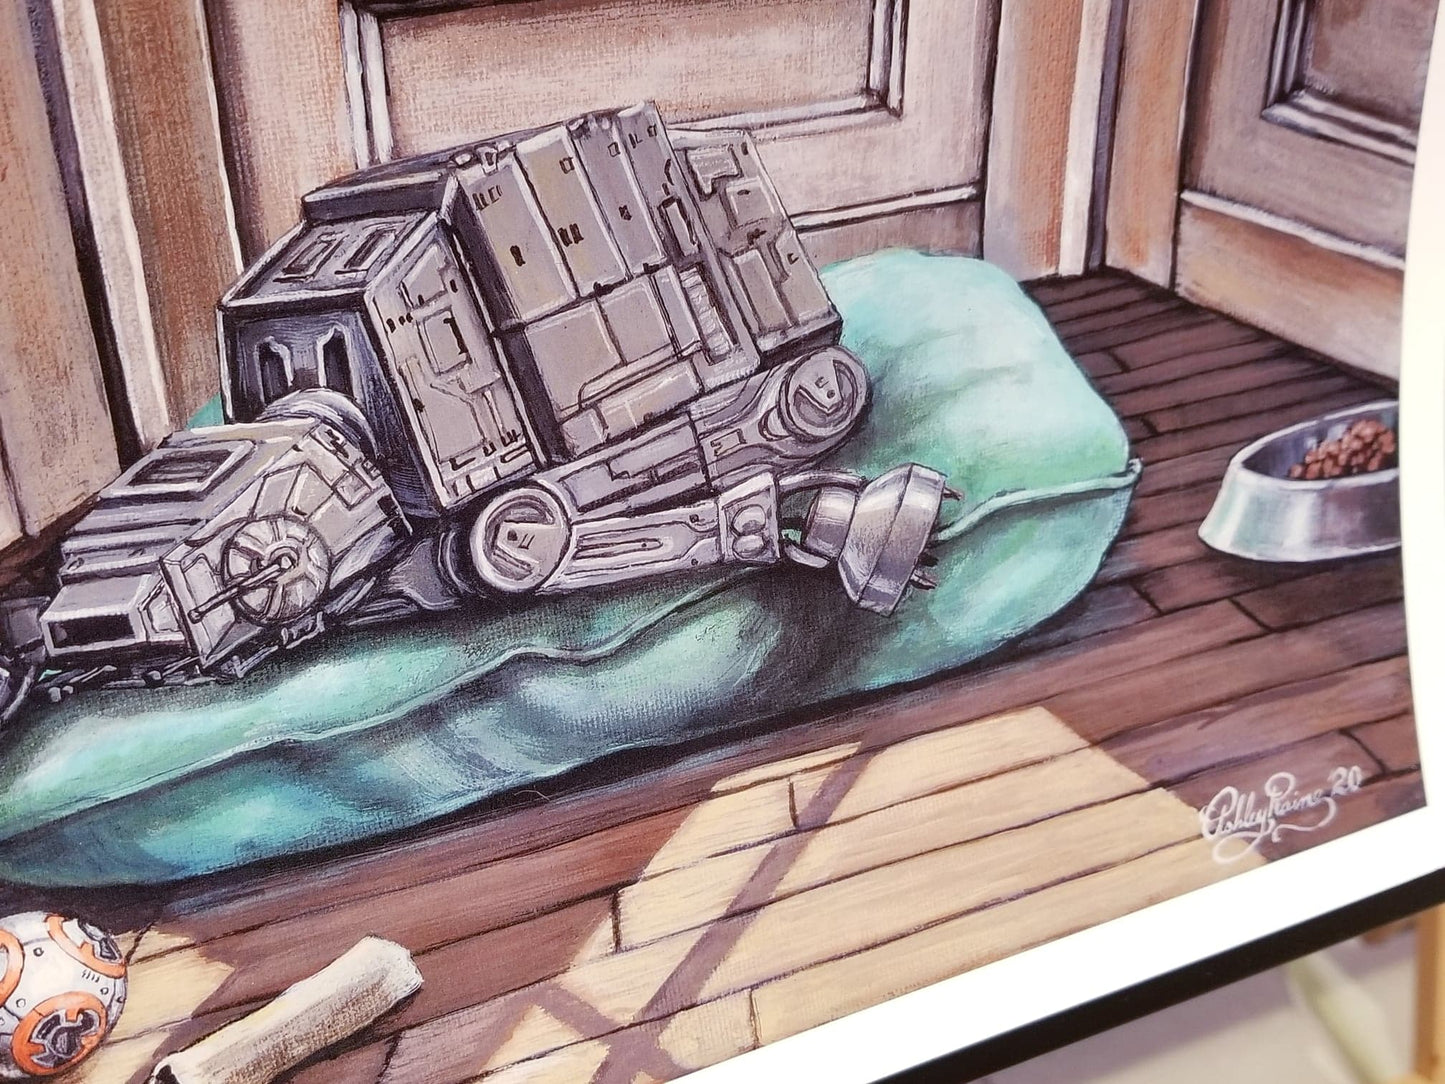 "Imperial Pupper" Star Wars Parody Art Print by Ashley Raine  Who's a good AT-AT? This boy is, and he's taking a well deserved puppy nap by the window! This Star Wars parody art is perfect for Imperial War Machine lovers and Sith Sympathizers of course, but also for any Star Wars fan who loves their fur-babies!    Details to Enjoy: Pup has a Wookiee toy with a torn-off arm, a bone, a comfy bed, and a well loved BB-8 chewy toy for only the best of good boys.